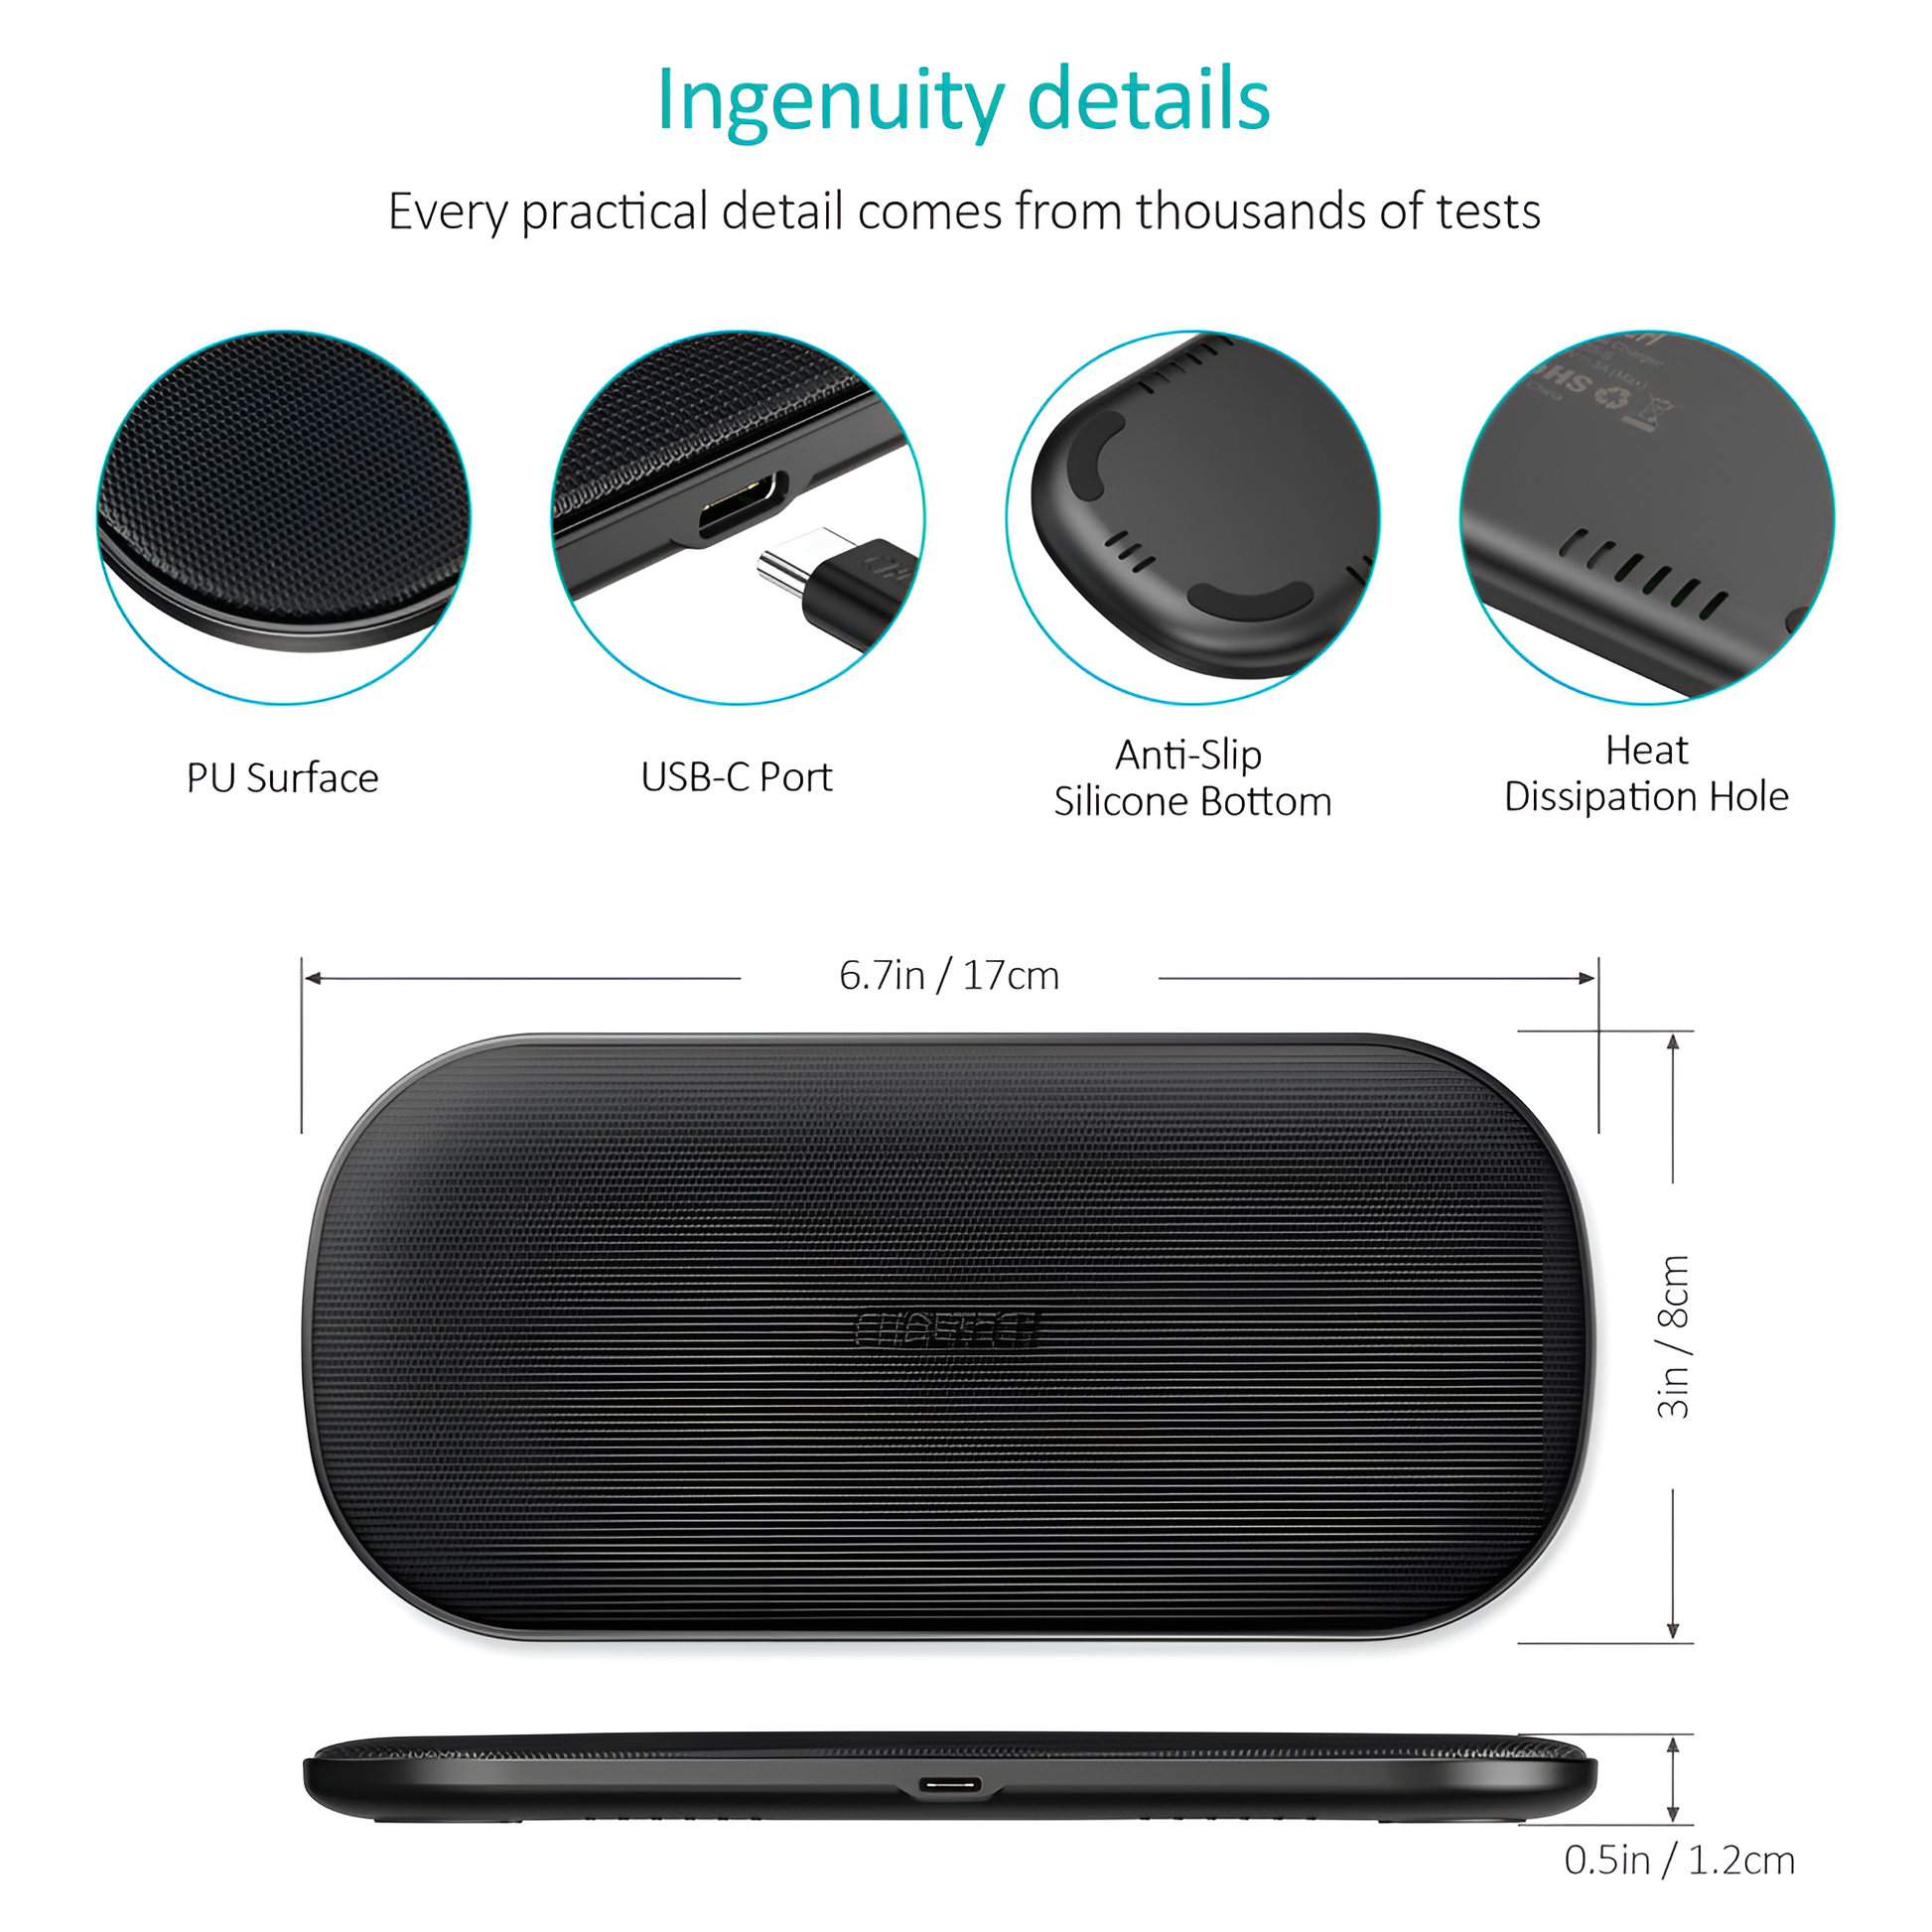 Choetech 5-Coil 15W Dual Fast Wireless Charger for Wireless charging Supported Mobiles, T535-S by jcbl accesories.| Ingenuity details | Every practical detail comes from thousands of tests. PU surface USB-C port, Anti-Slip Silicone Bottom, Heat Dissipation Hole 